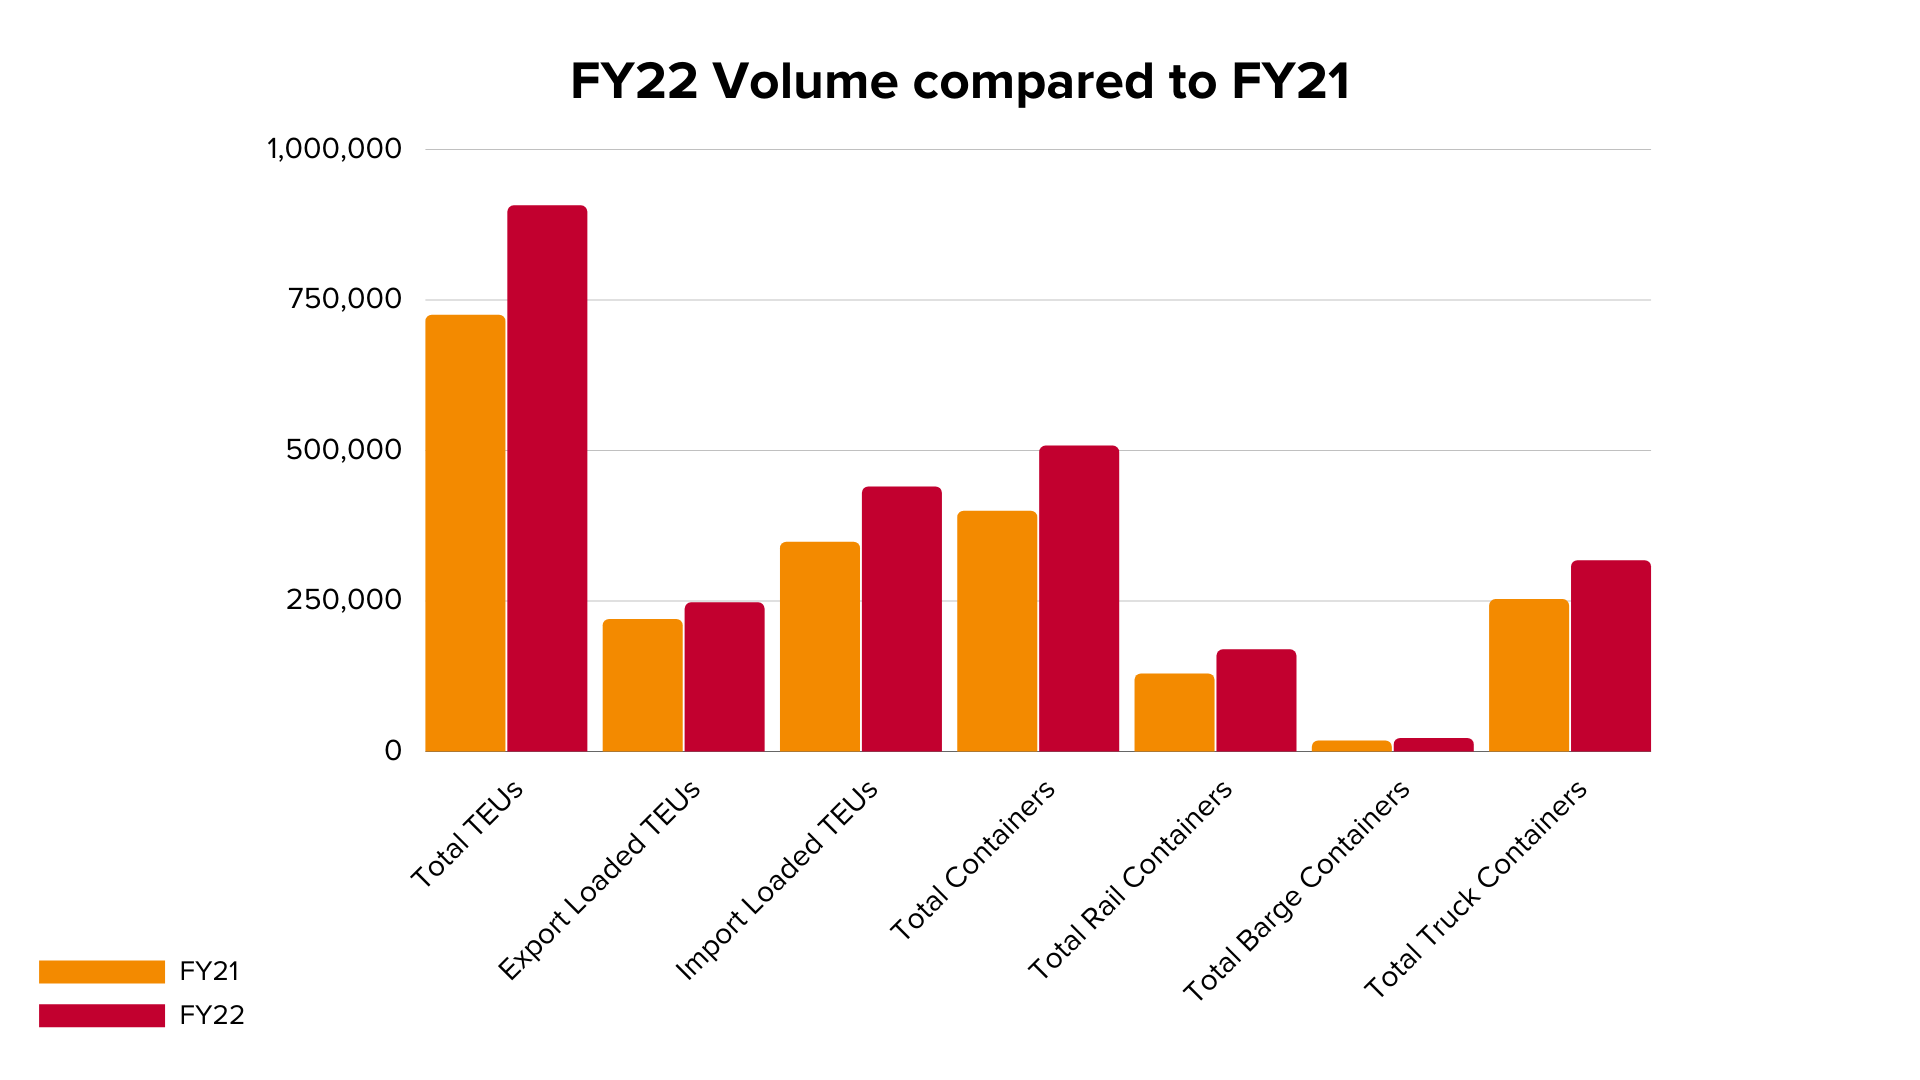 Port of Virginia FY22 volume compared to FY21